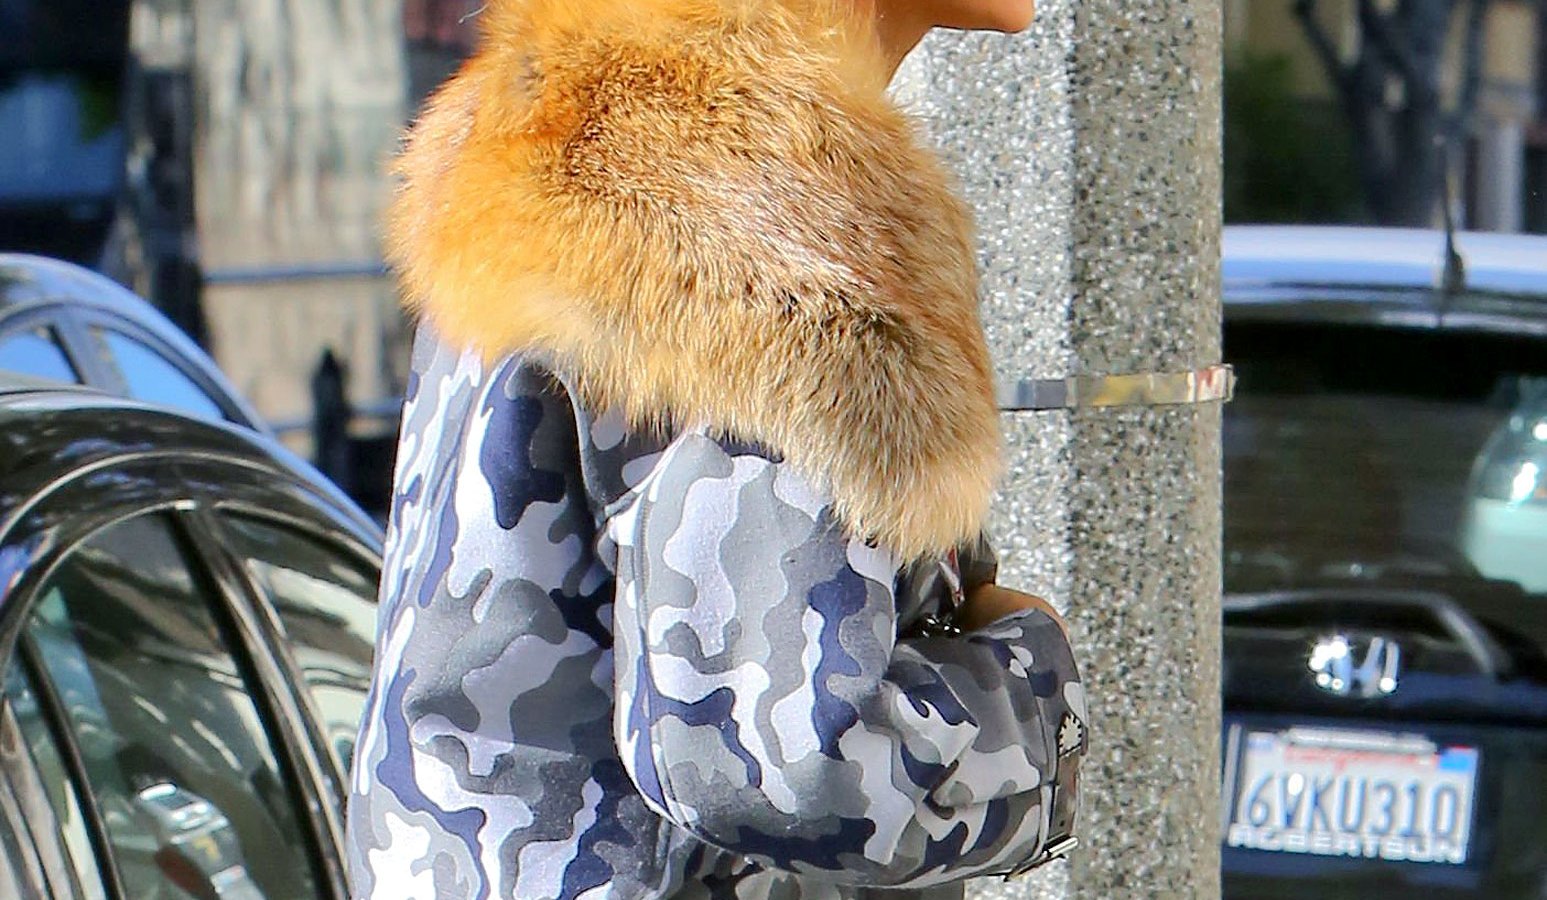 Beyonce stepped out in a fur lined coat while going vegan